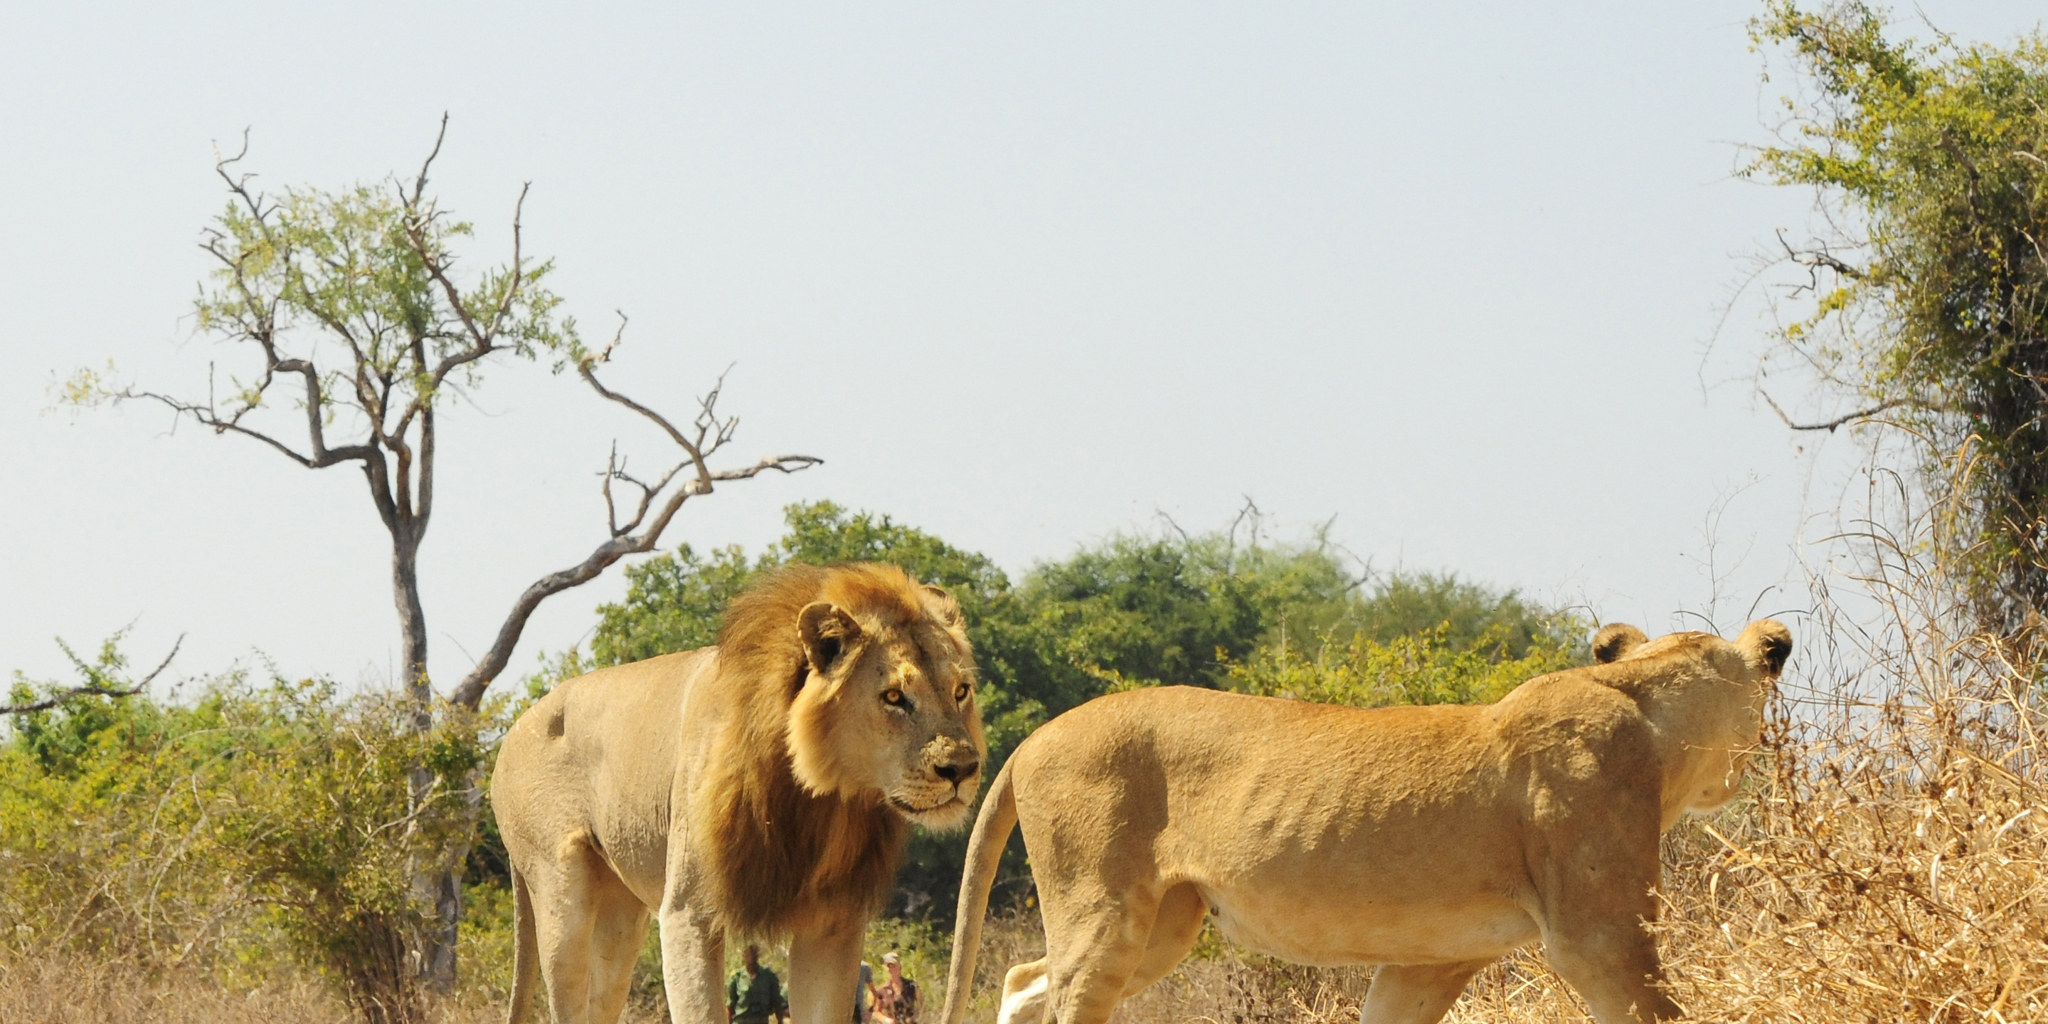 Lion and Lioness Walk